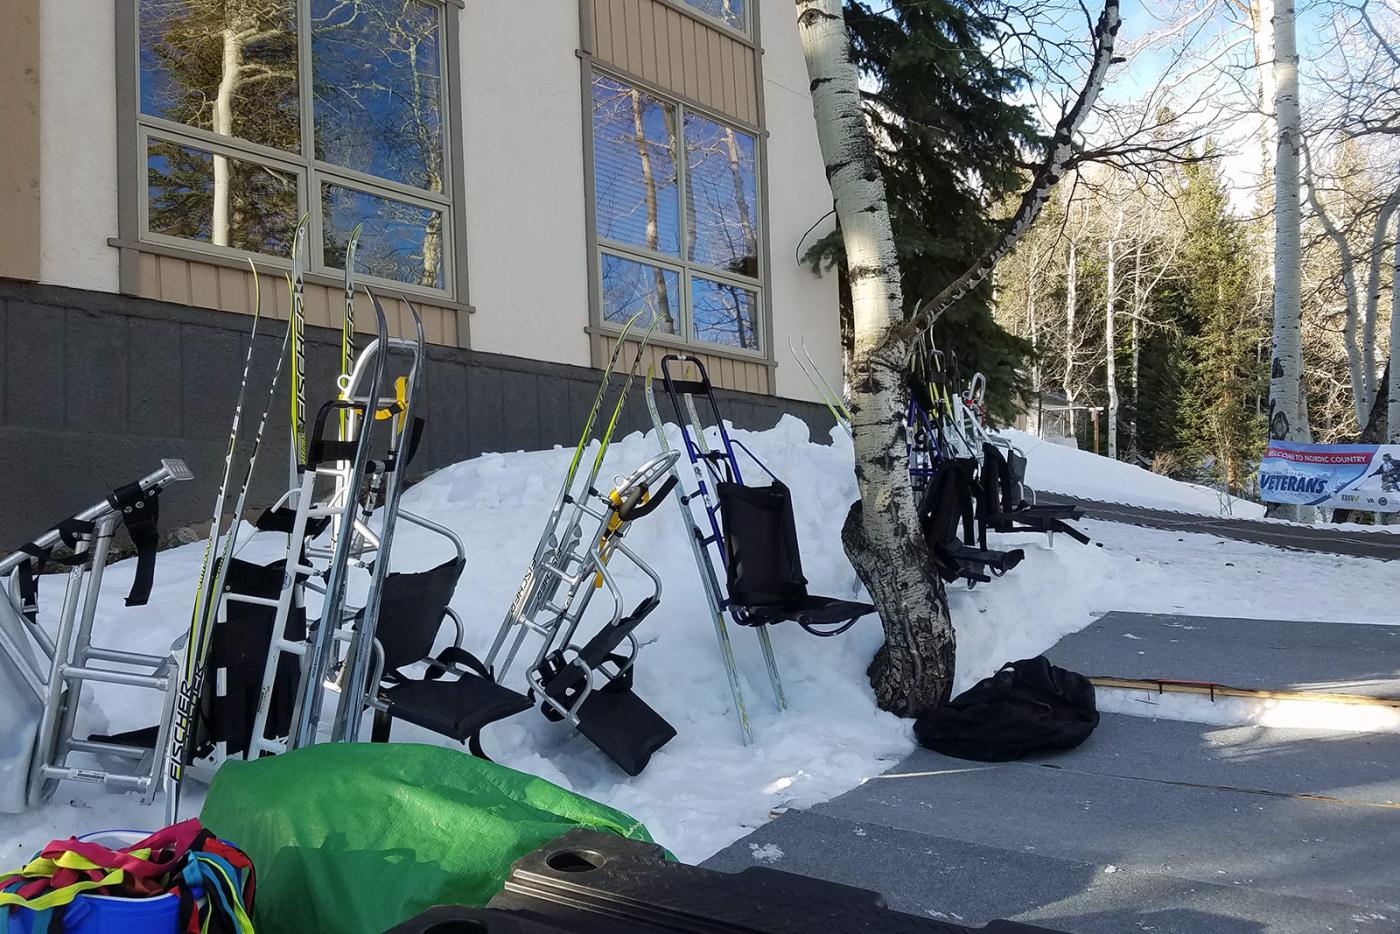 Cross country sit ski equipment at the Winter Sports Clinic in Snowmass, Colorado